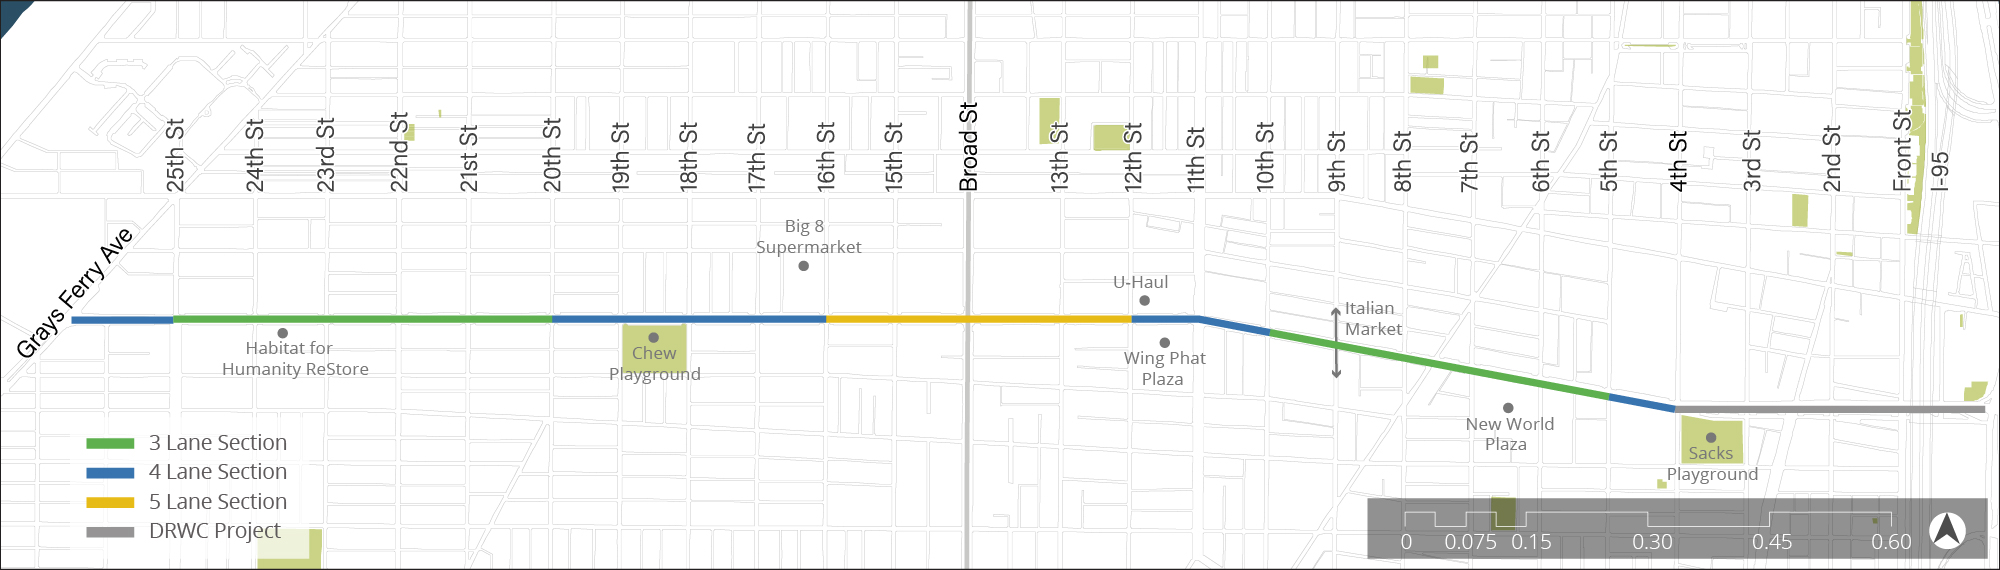 a map of washington ave showing proposed lane changes